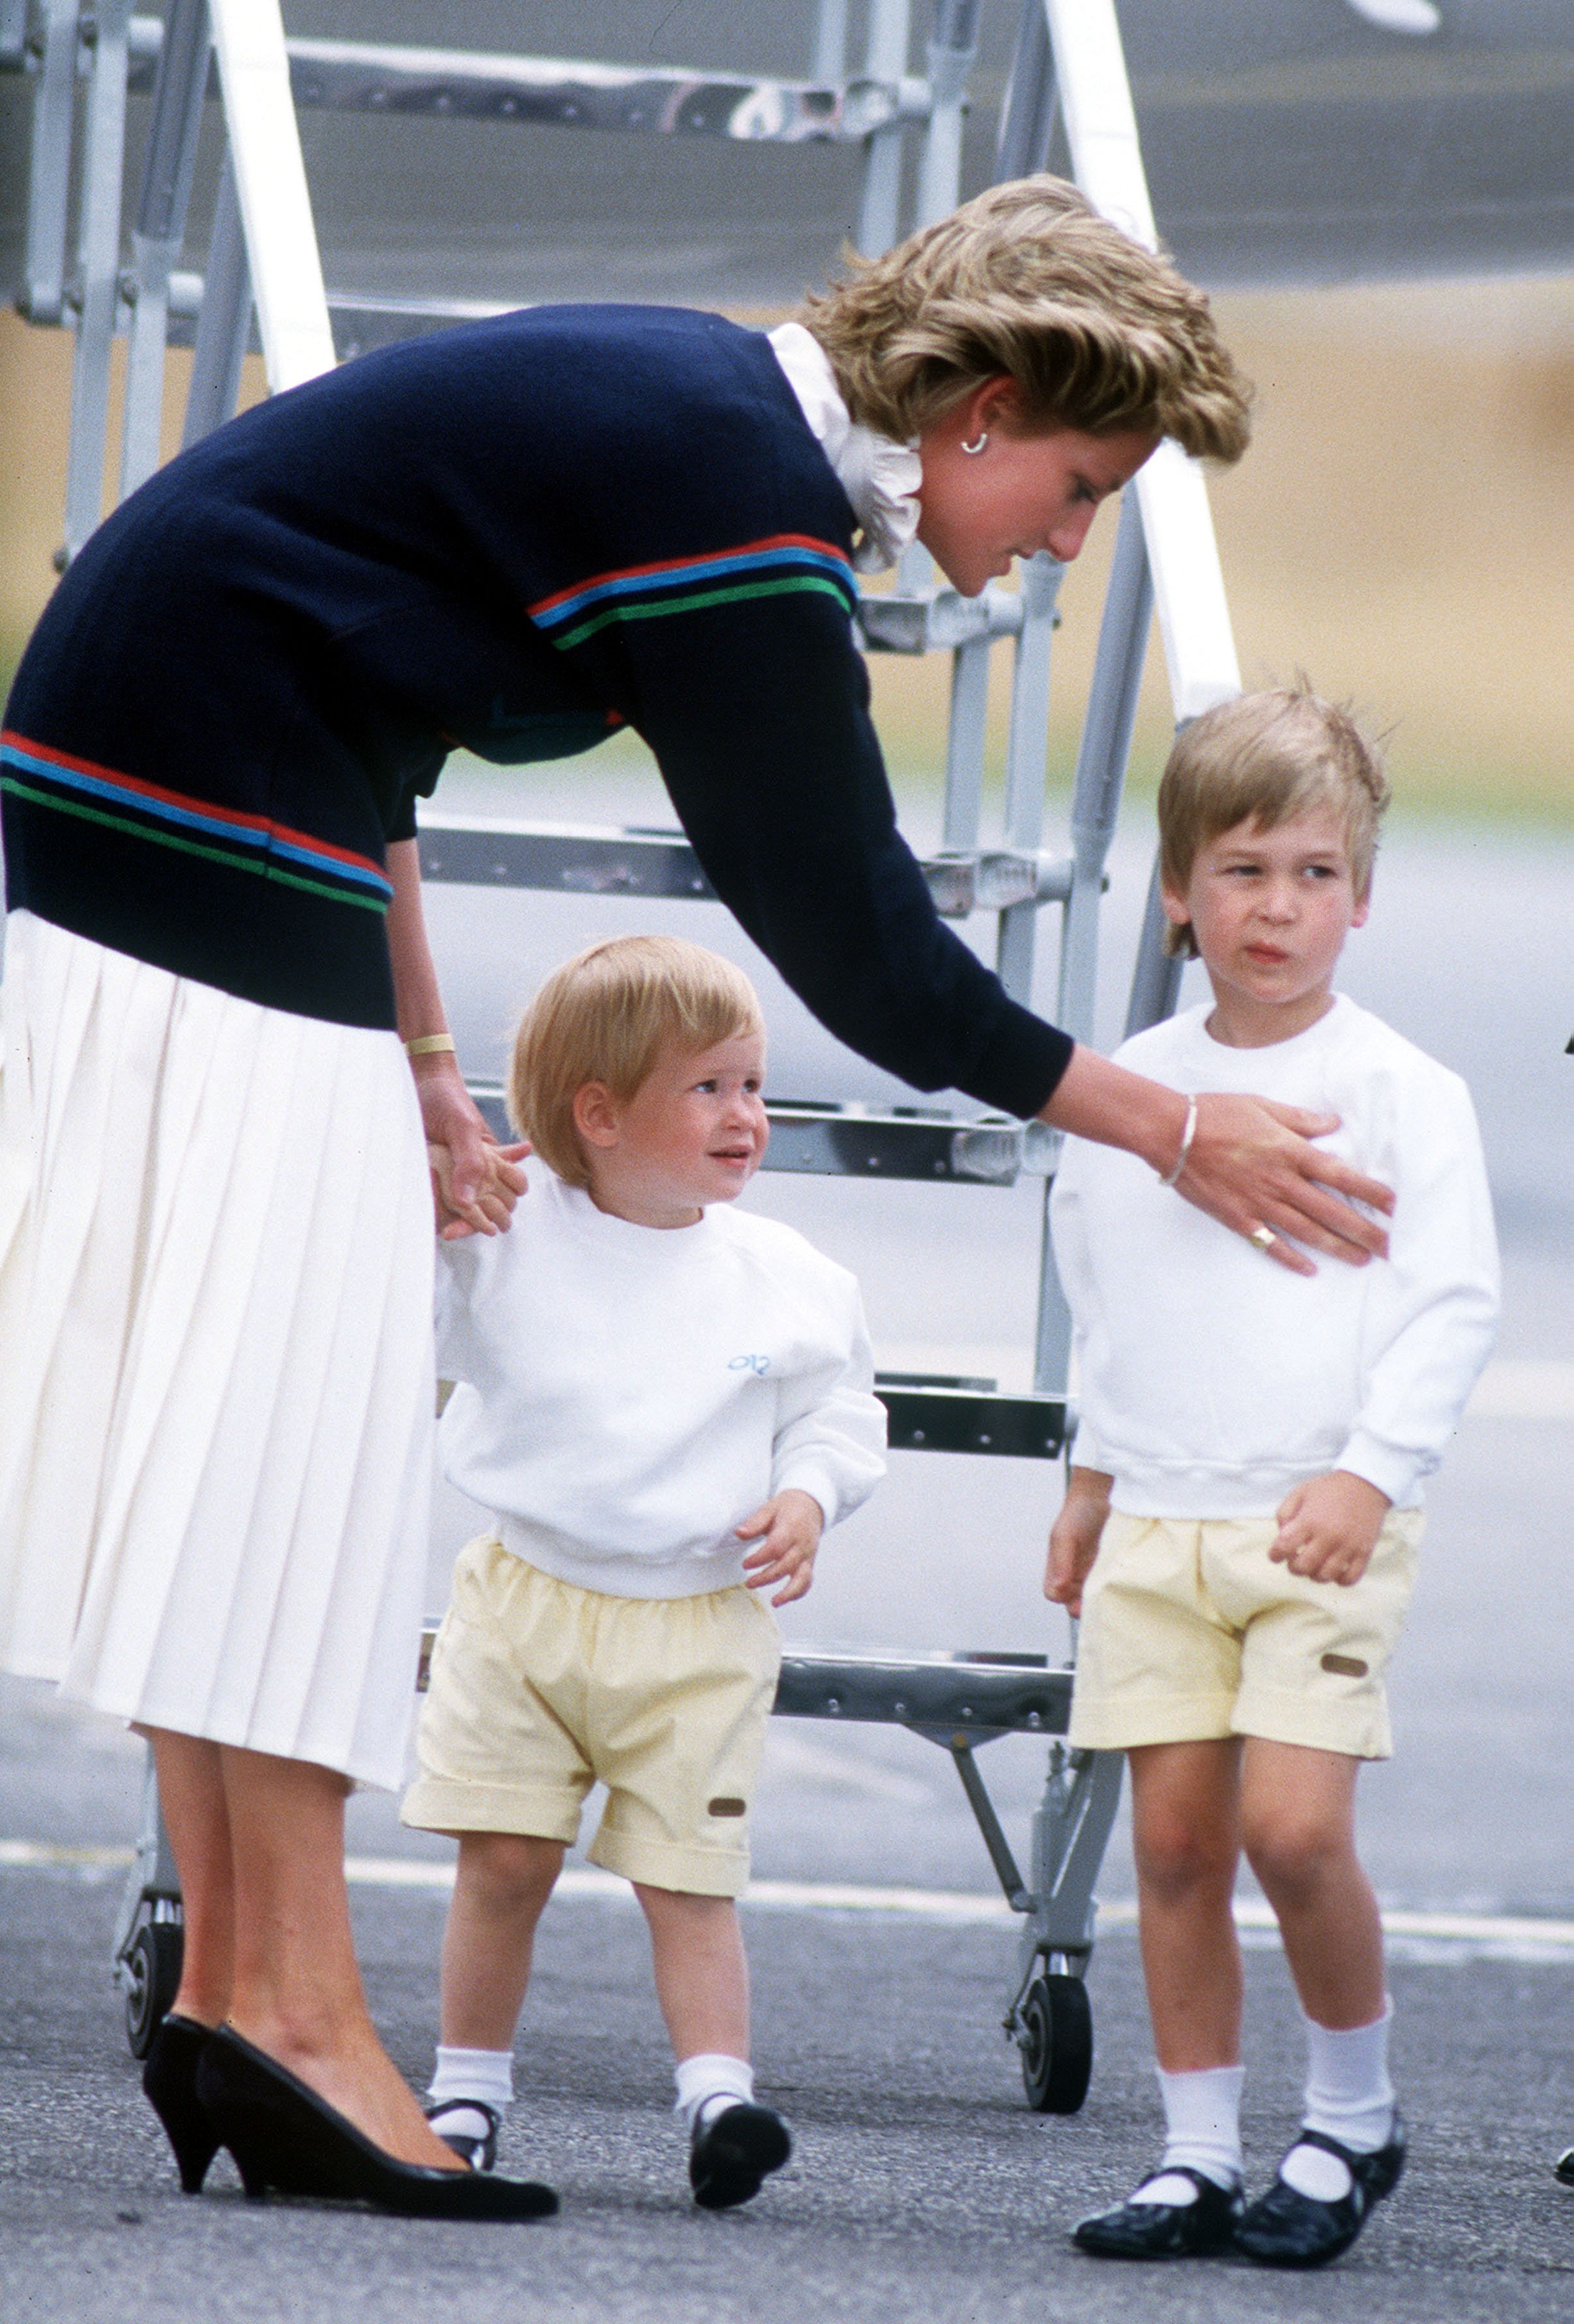 Princess Diana arriving at Aberdeen airport with her sons princes William and Harry for a holiday at Balmoral Castle in August 1986. / Source: Getty Images